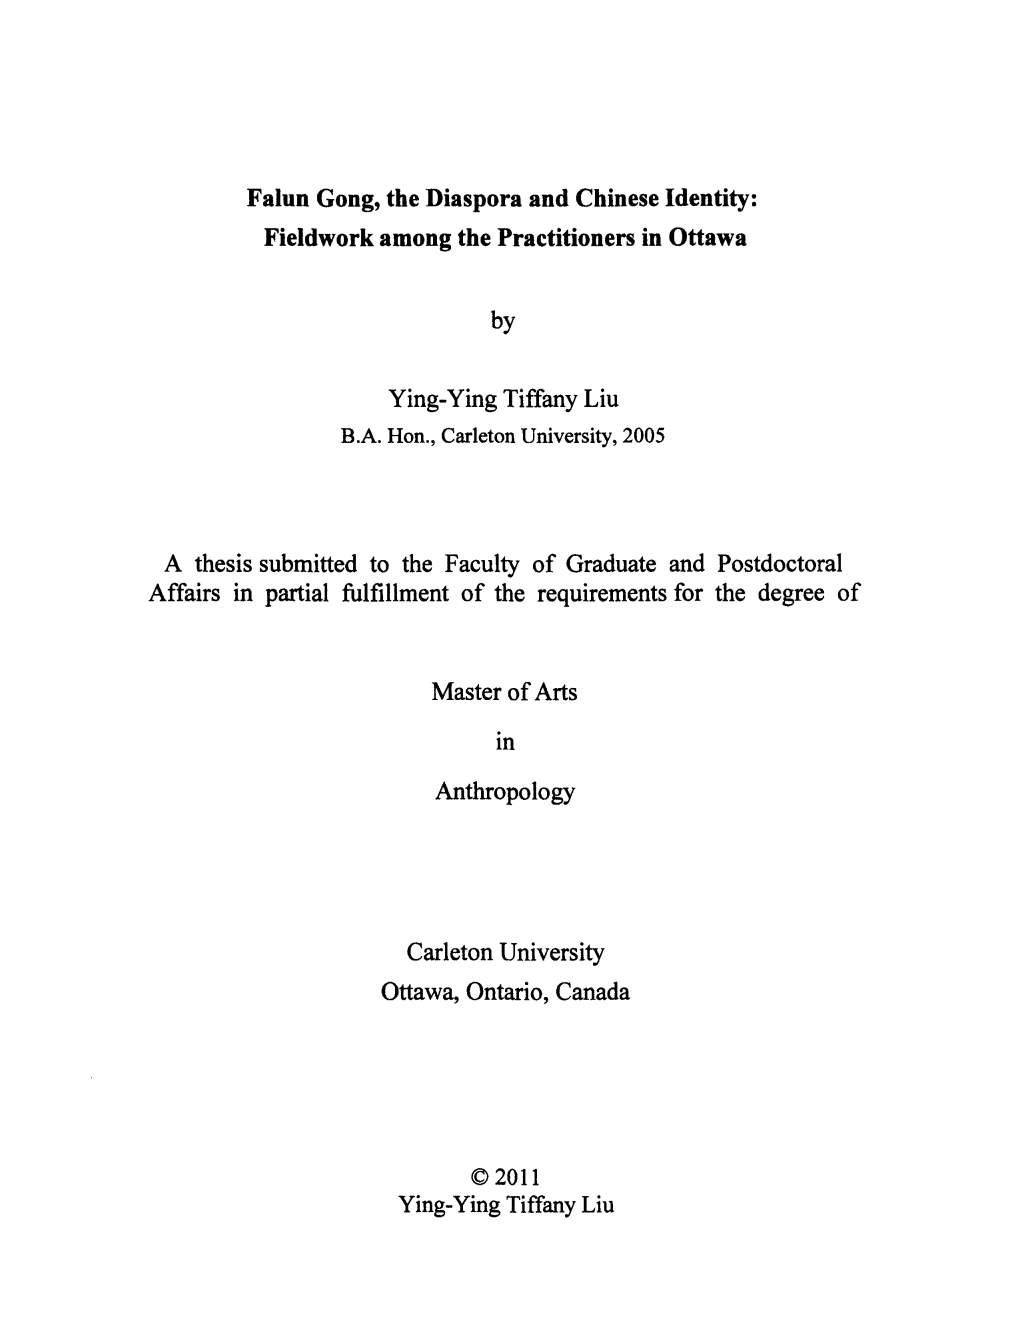 Falun Gong, the Diaspora and Chinese Identity: Fieldwork Among the Practitioners in Ottawa